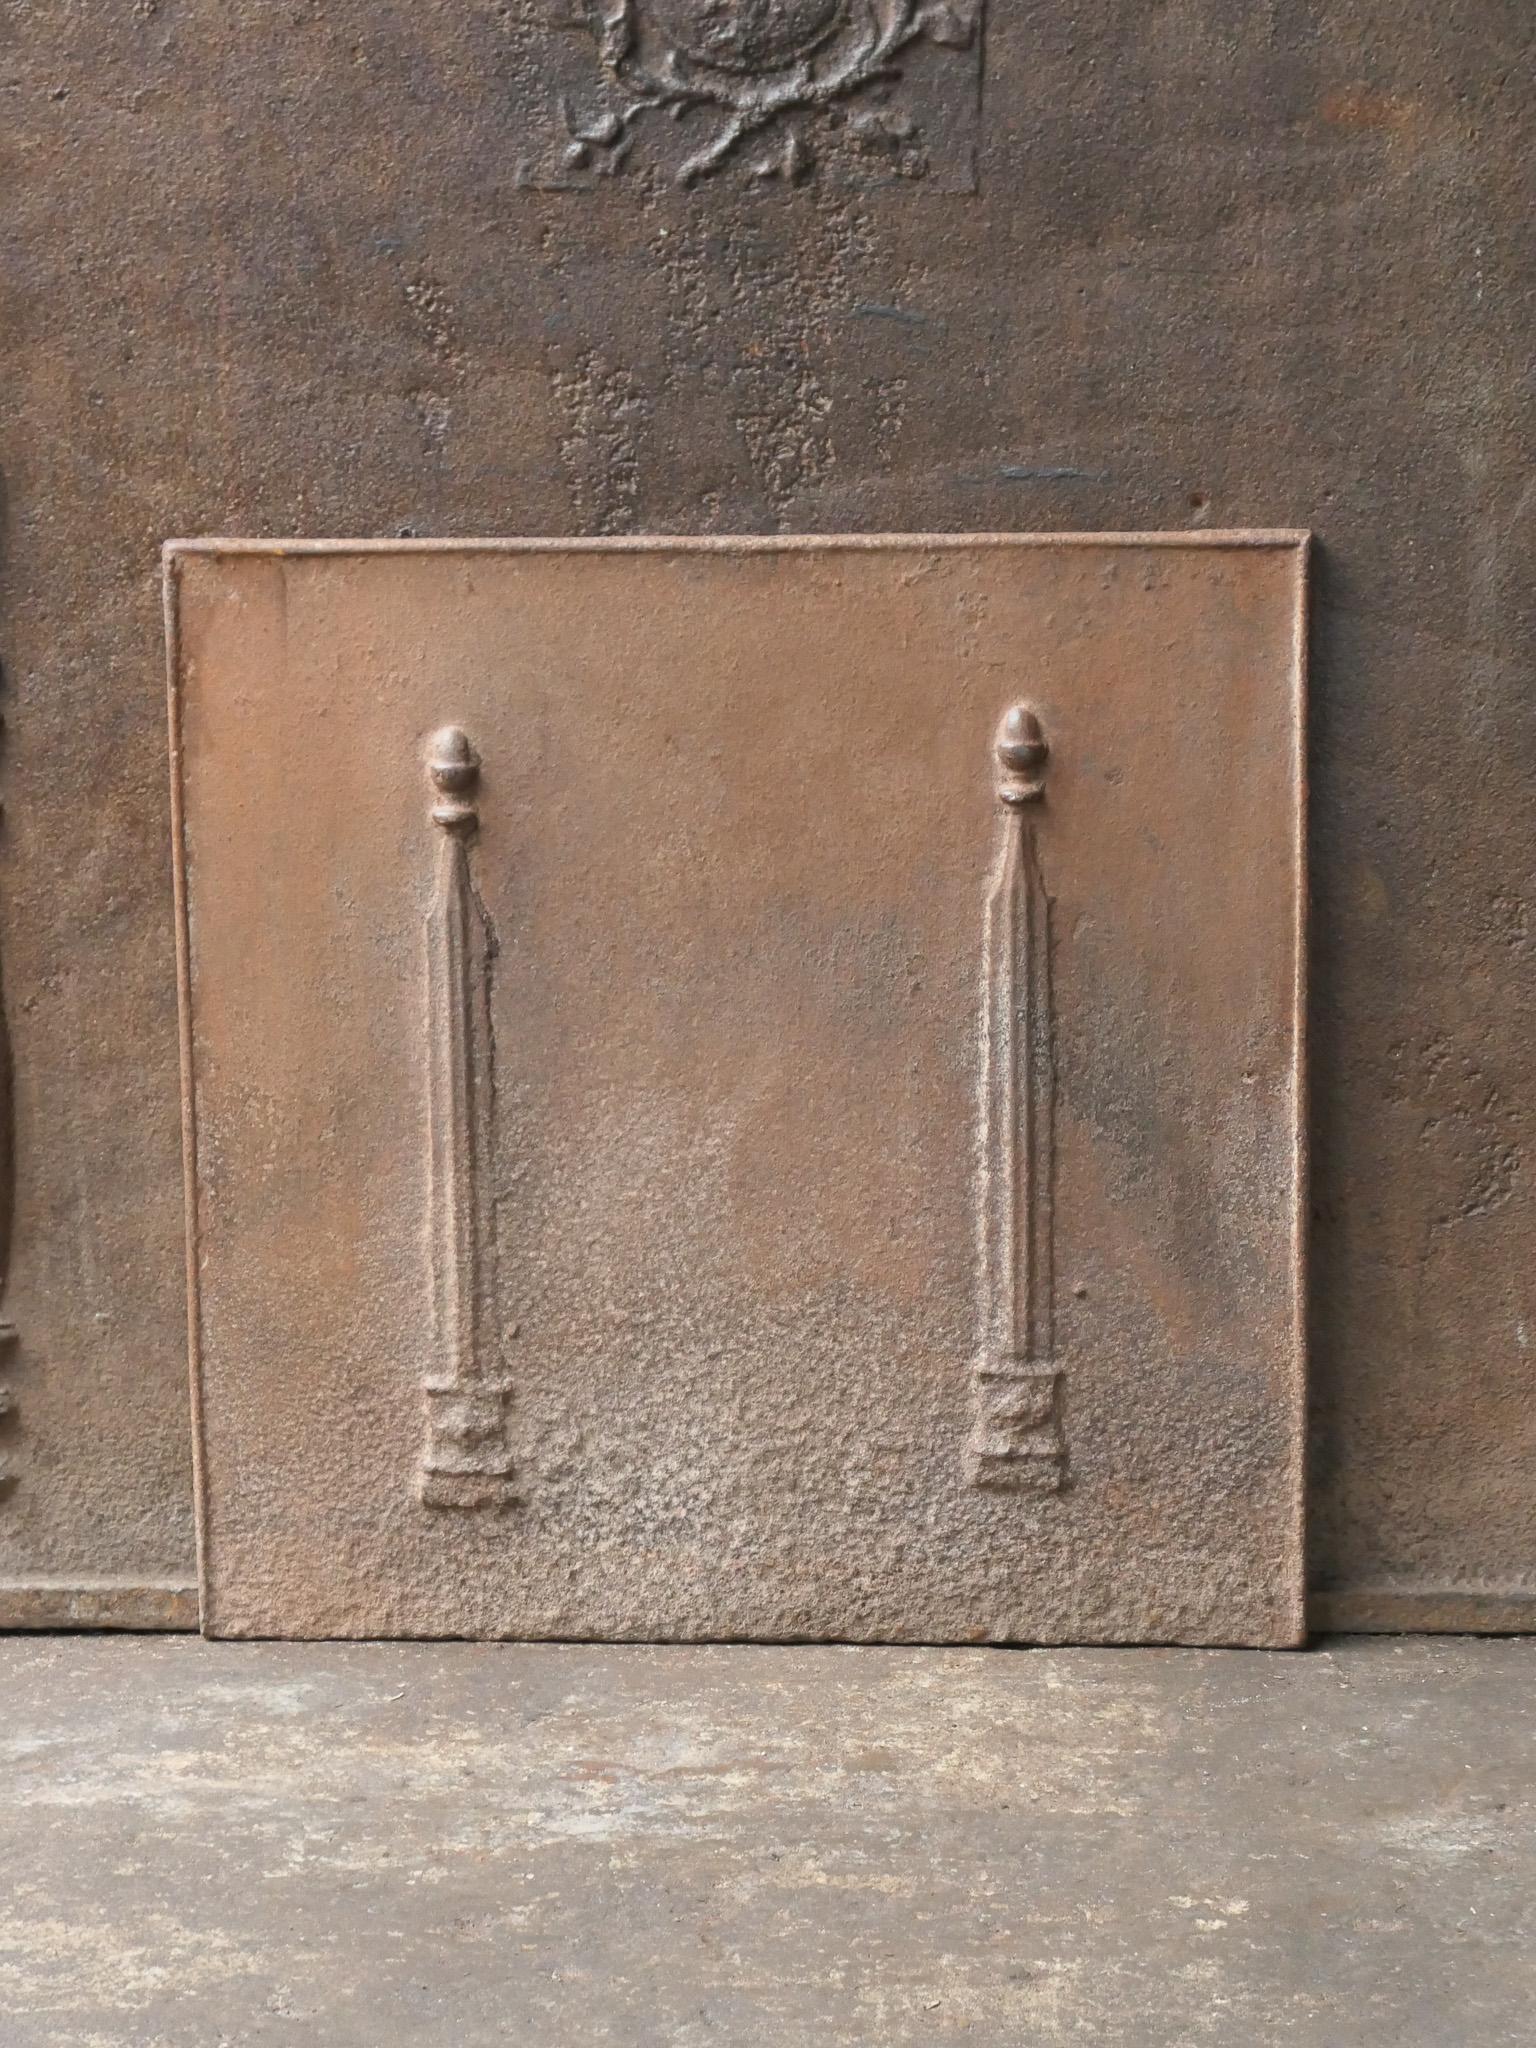 18th - 19th century French neoclassical fireback with two pillars of freedom. The pillars symbolize the value liberty, one of the three values of the French revolution. 

The fireback is made of cast iron and has a natural brown patina. Upon request